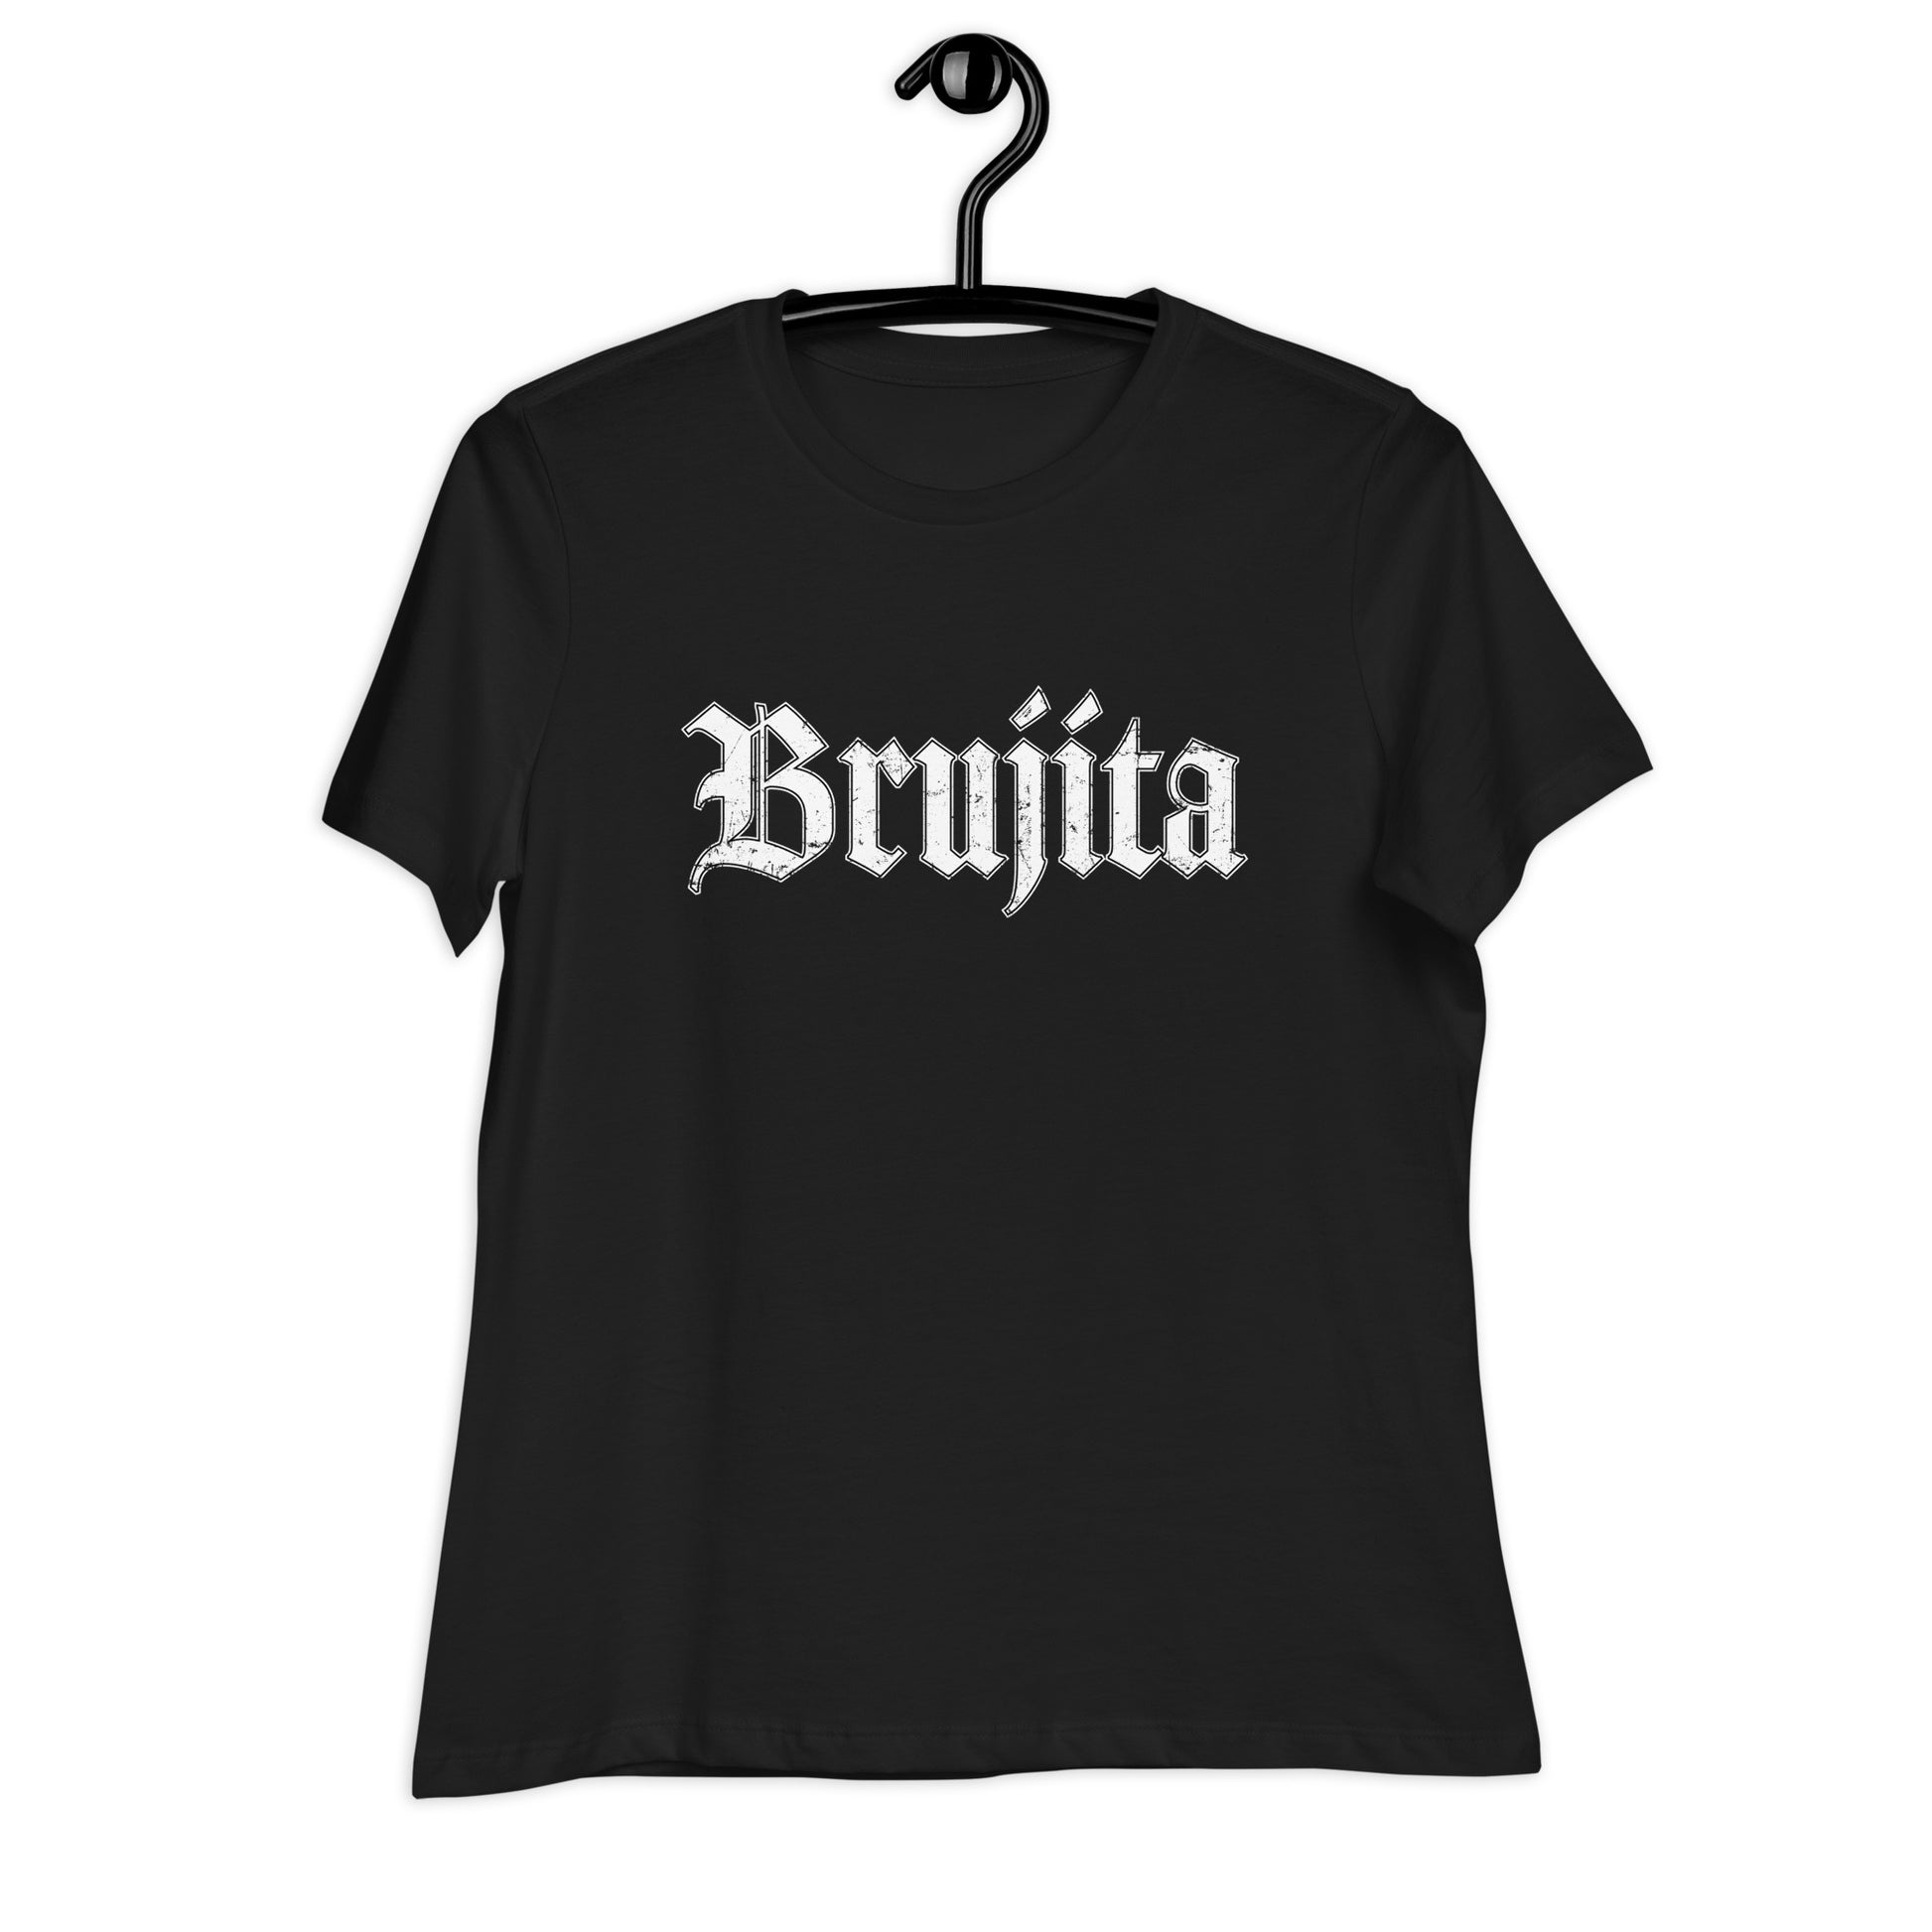 Brujita Women's Distressed Halloween T-Shirt on hanger – Old English font, black tee with white distressed text